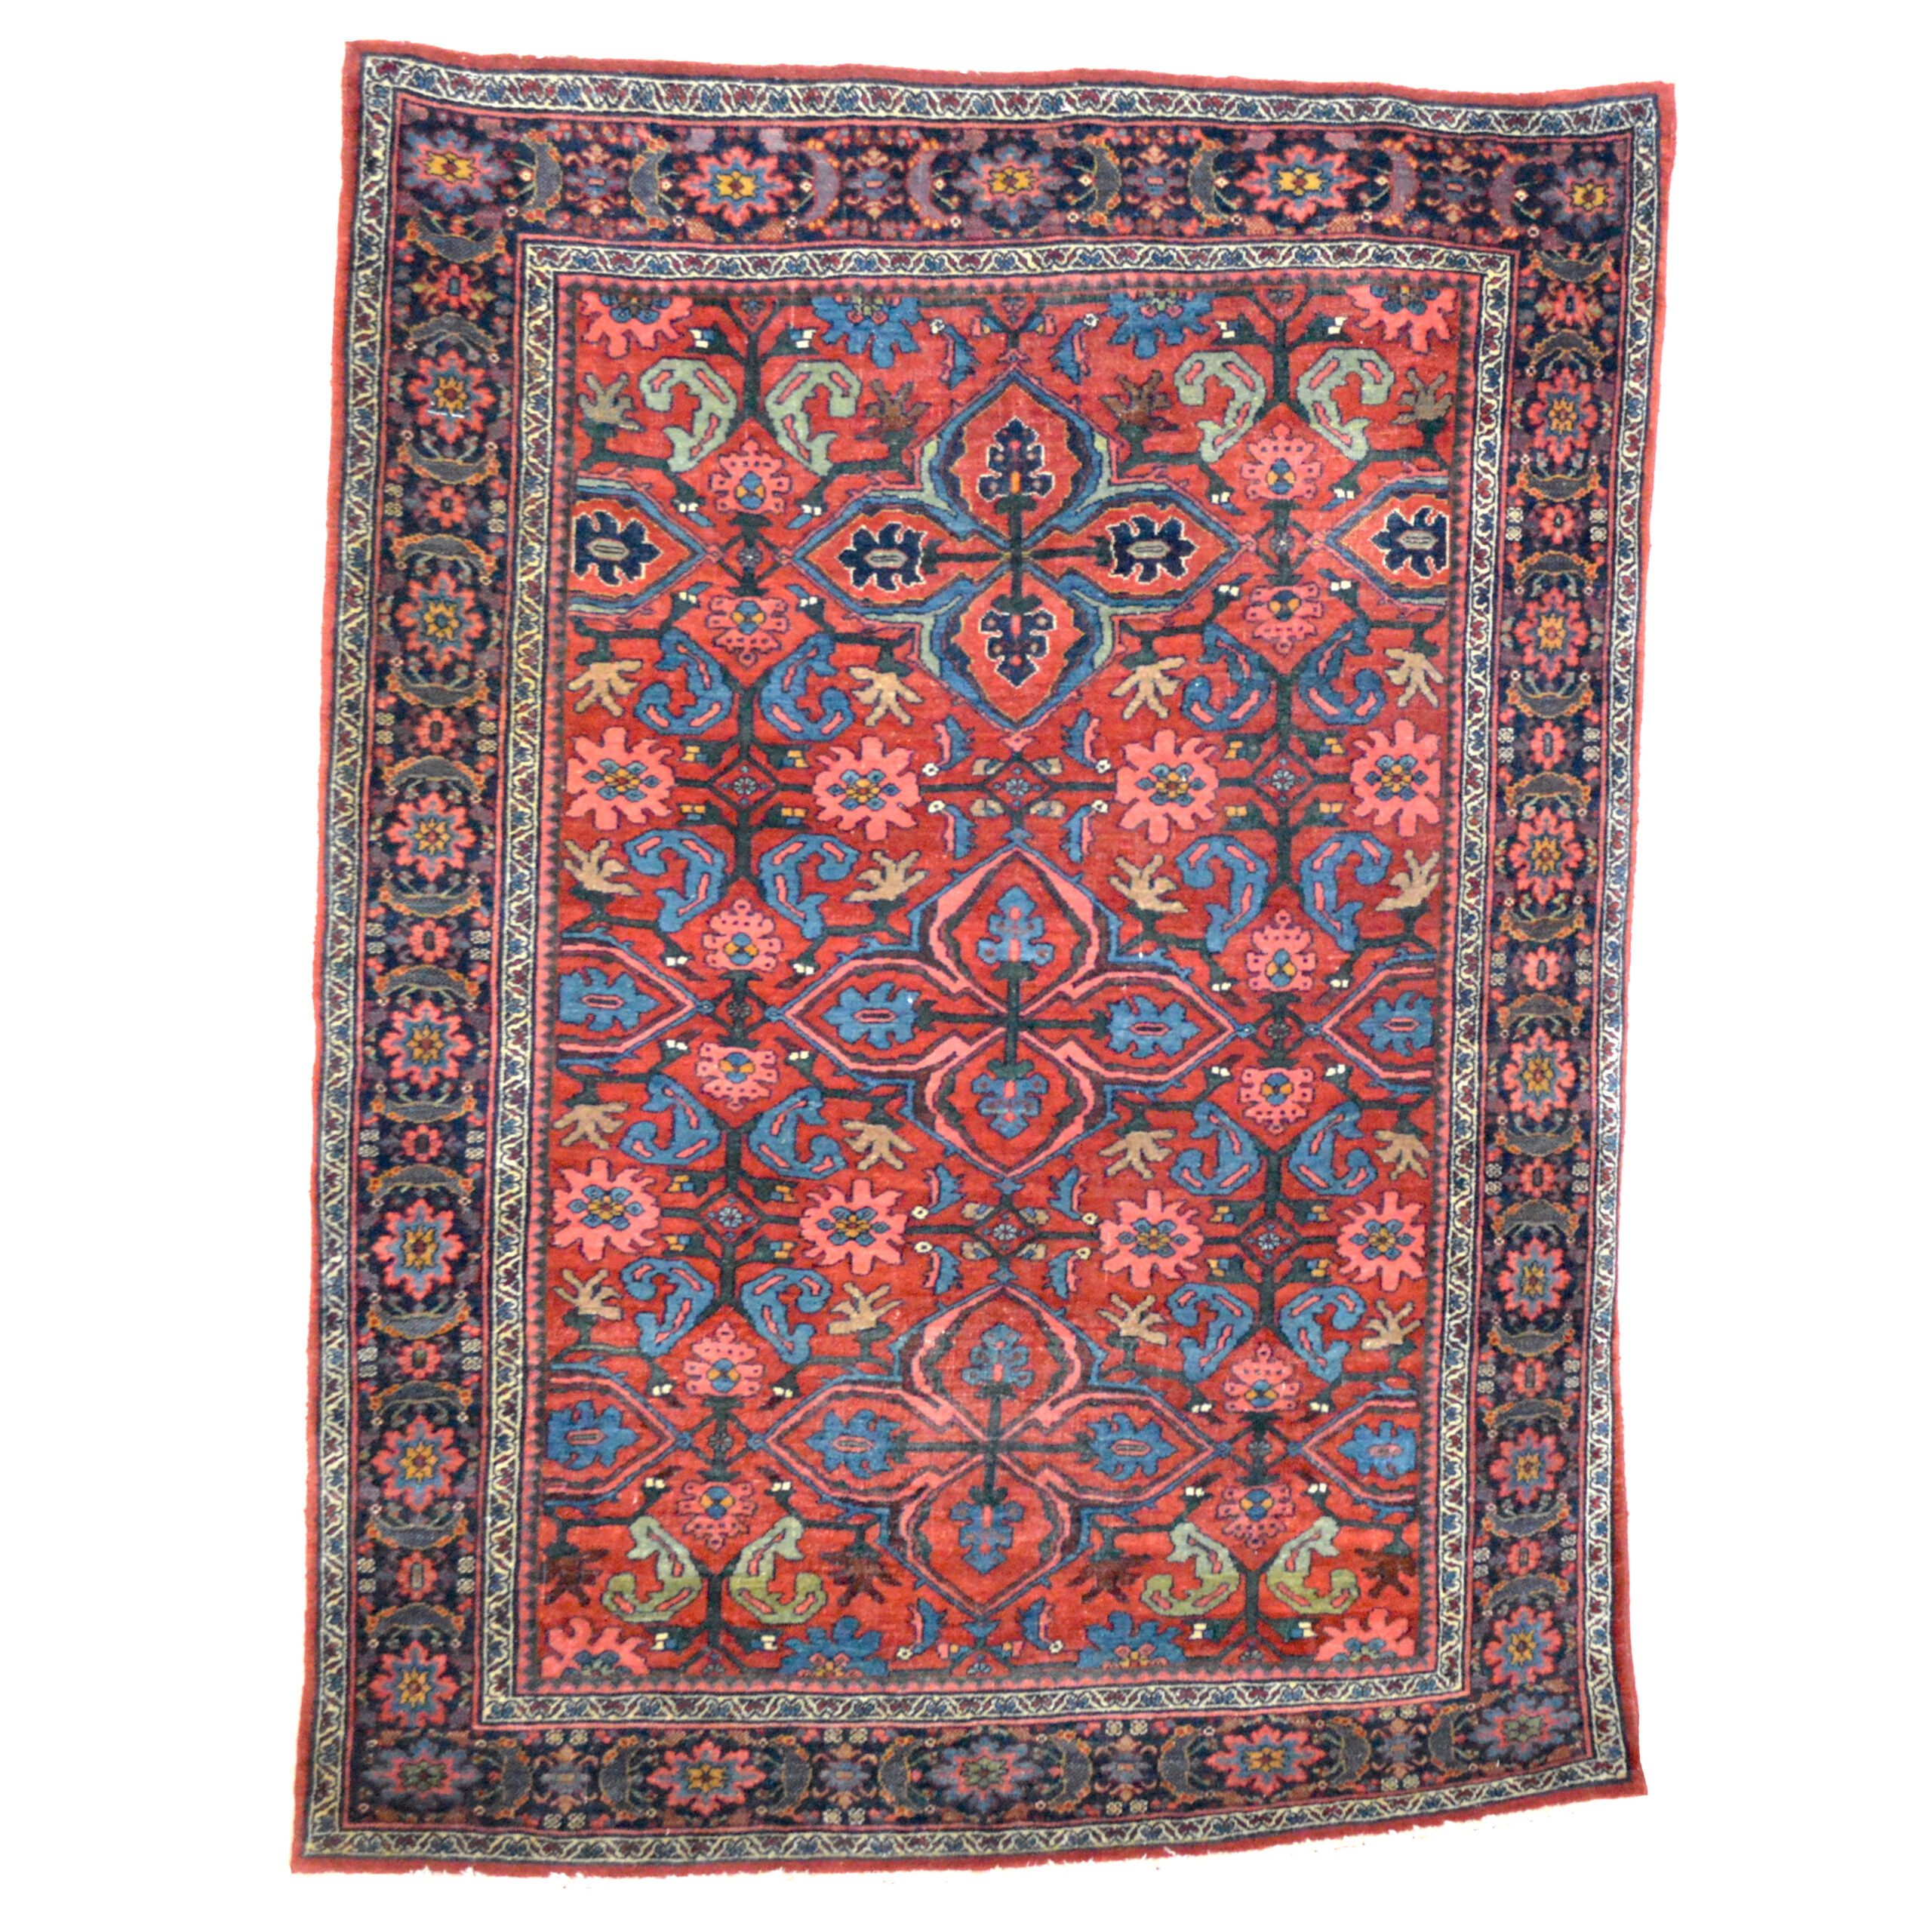 Antique Kurdish rug from the village of Bidjar in northwest Persia's Kurdistan province. The red field is decorated with Quatrefoil elements and stylized leaves and flowers. Douglas Stock Gallery, antique Oriental rugs Boston,MA, antique Persian rugs New England, antique Bidjar rug, antique Kurdish rug